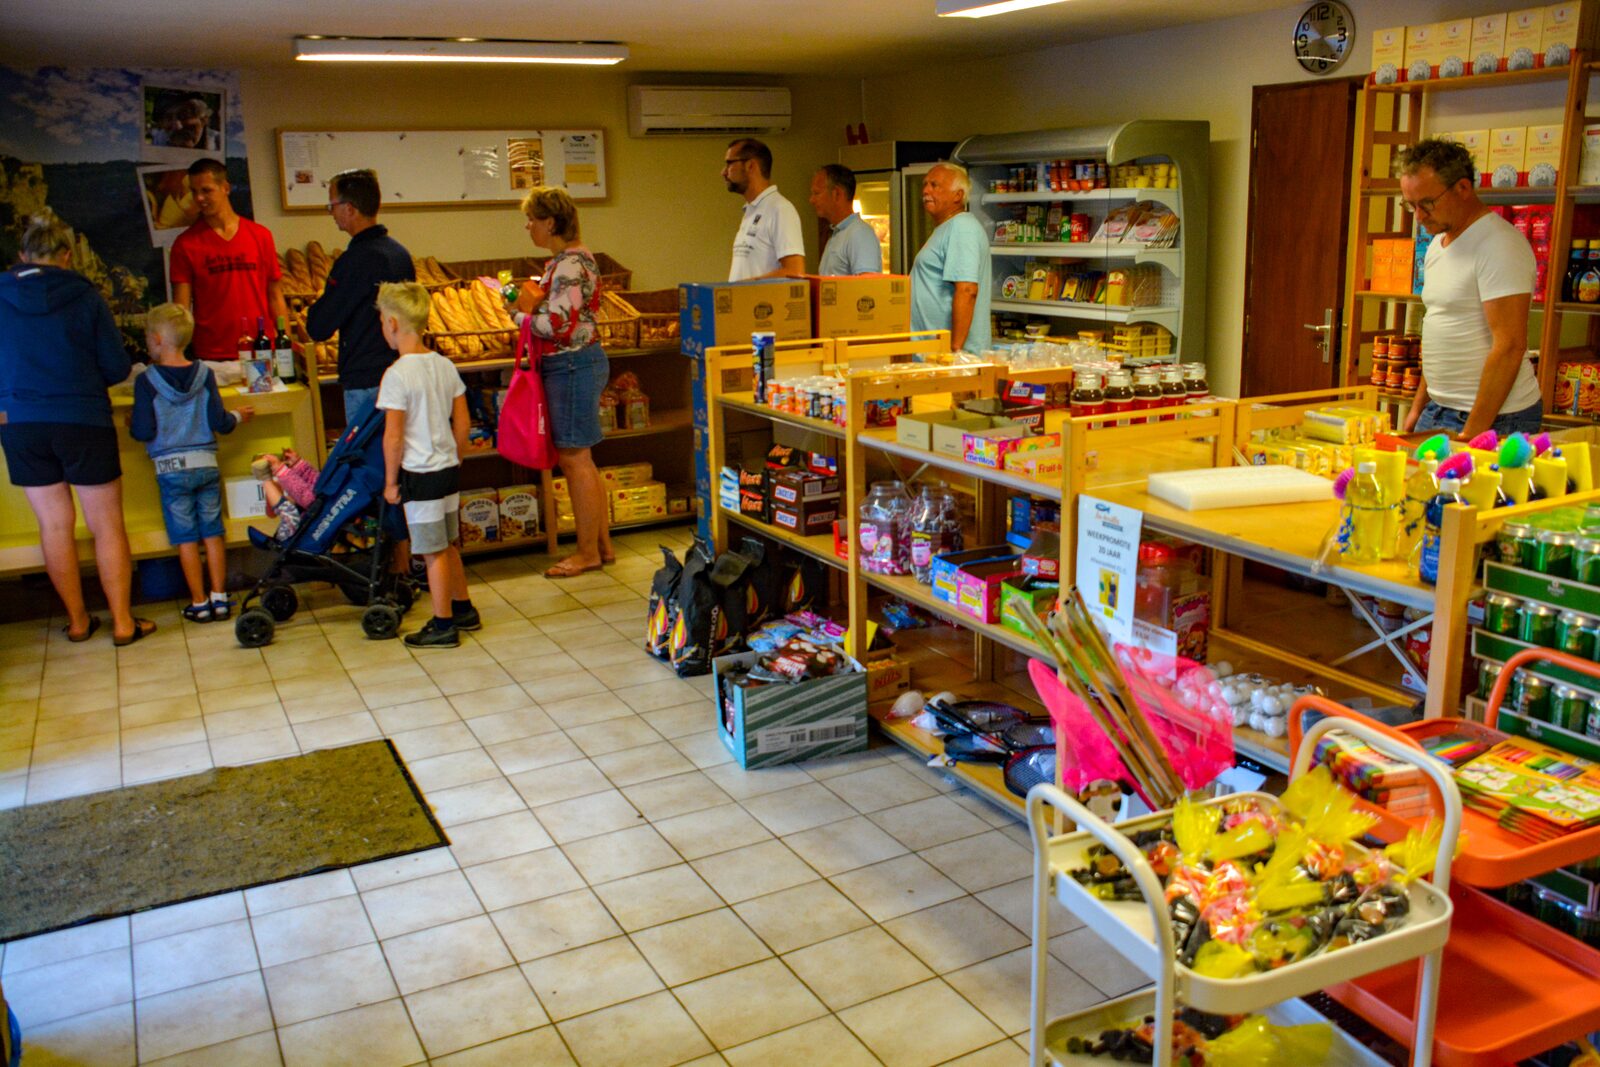 Park shop with customers at the checkout